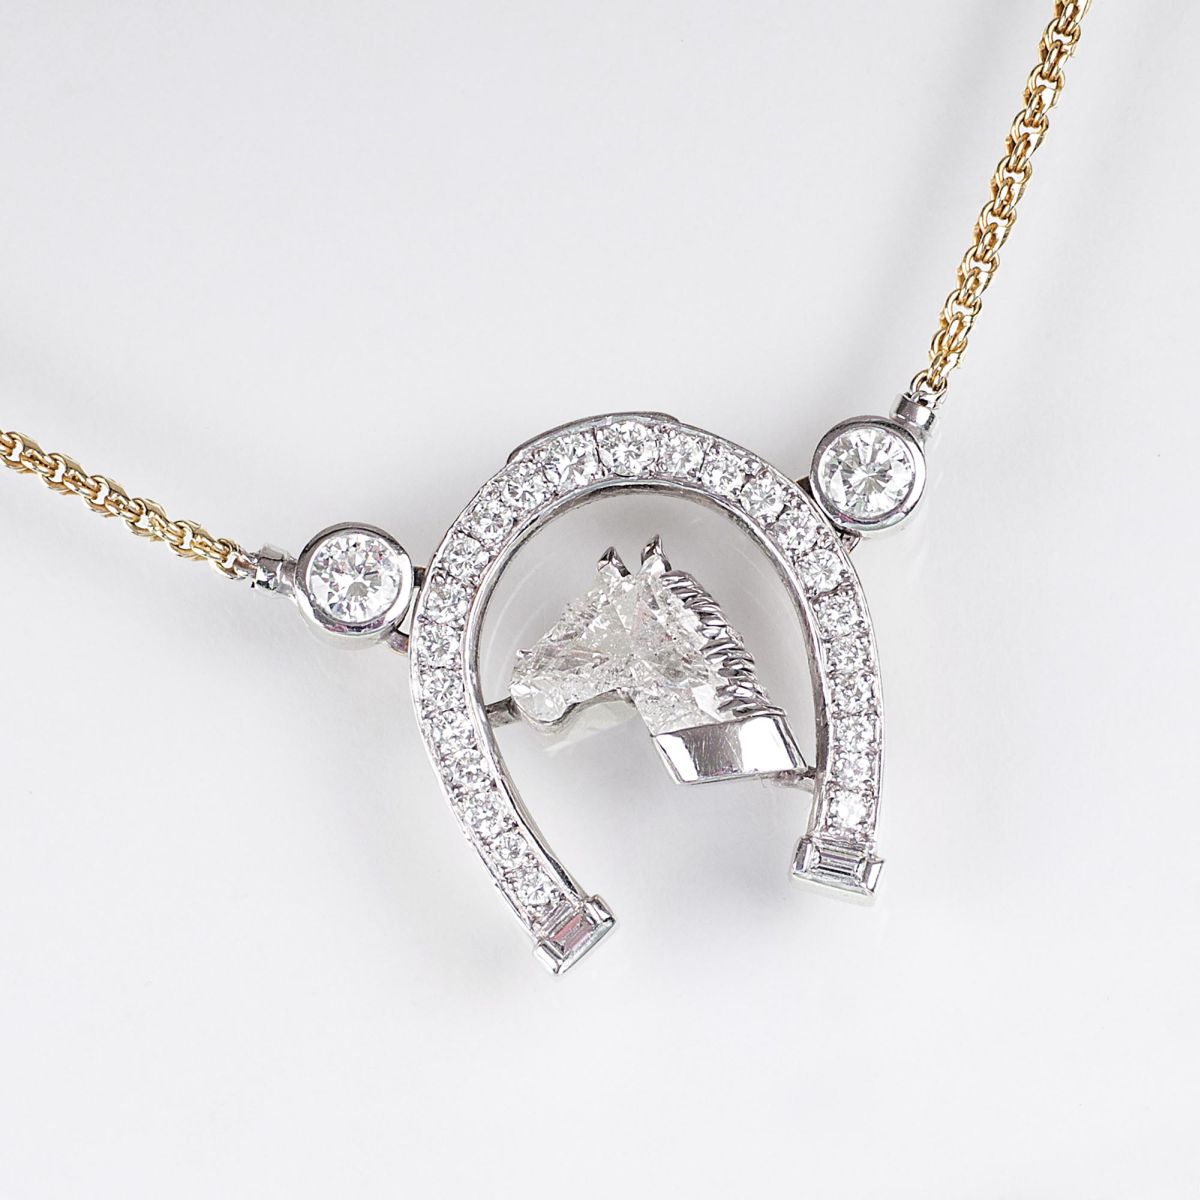 An exceptional Diamond Pendant 'Horse' with Necklace